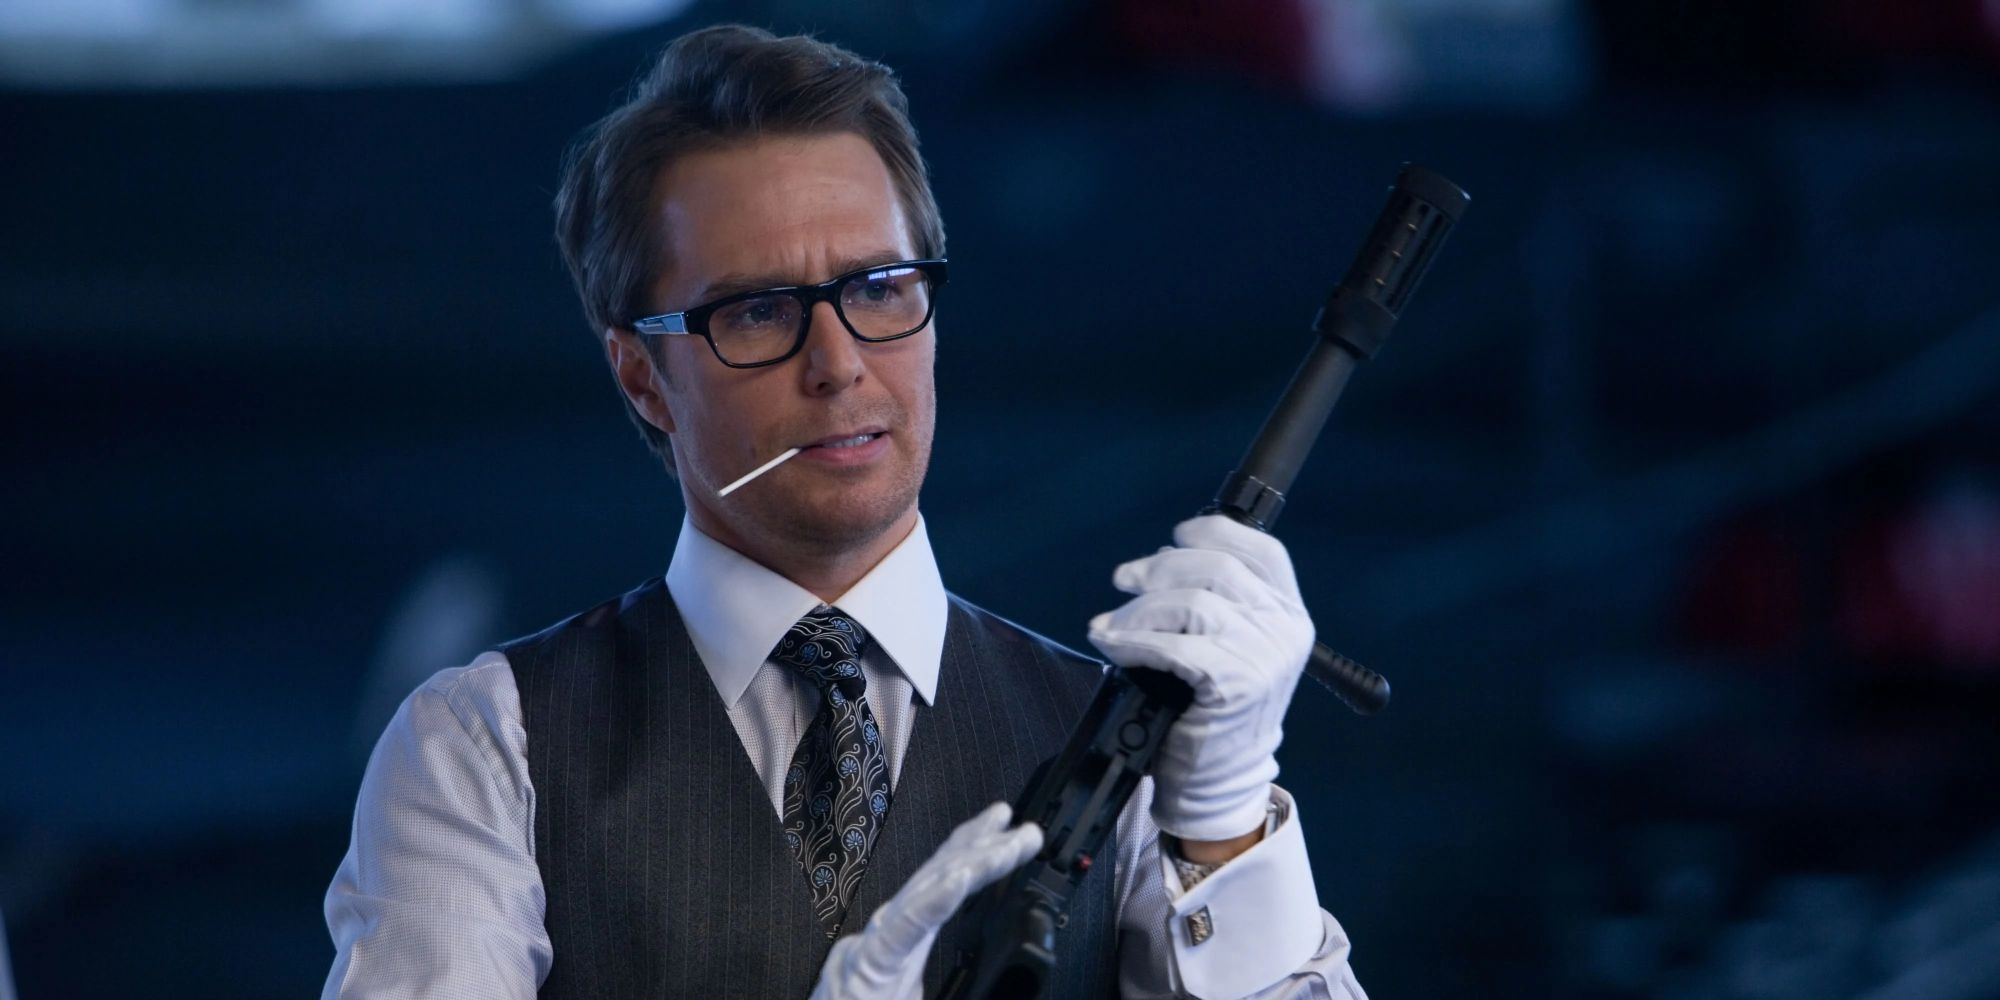 Sam Rockwell as Justin Hammer demonstrating his arsenal of weapons on Iron Man 2